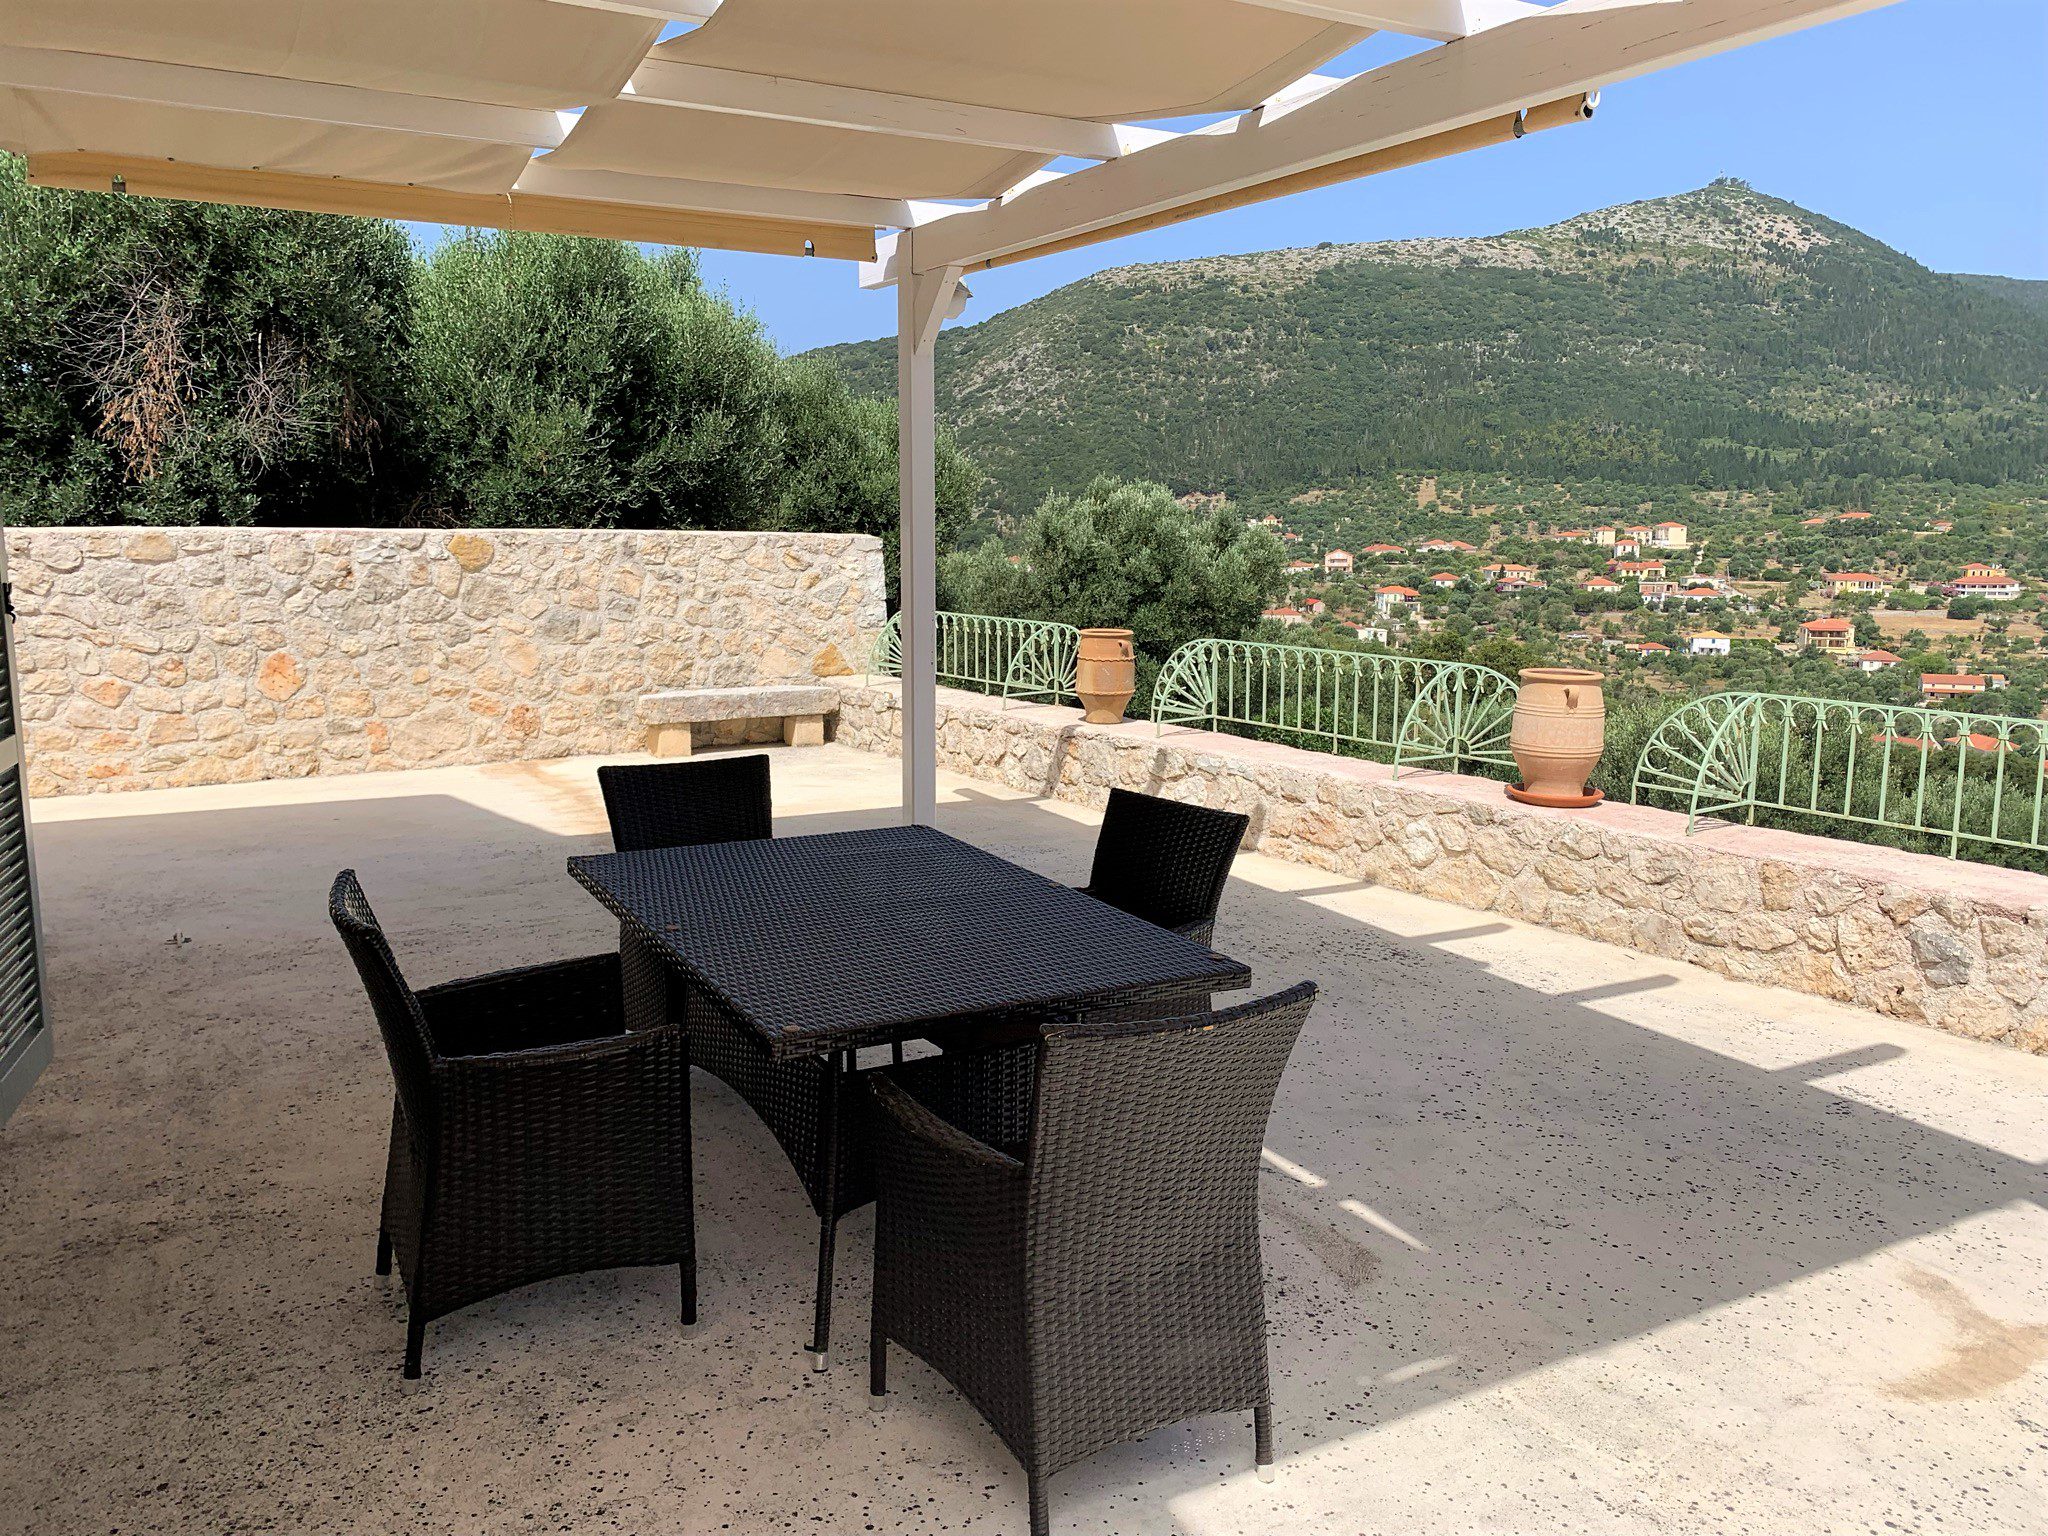 Front garden and sitting area of holiday houses for rent on Ithaca Greece, Stavros